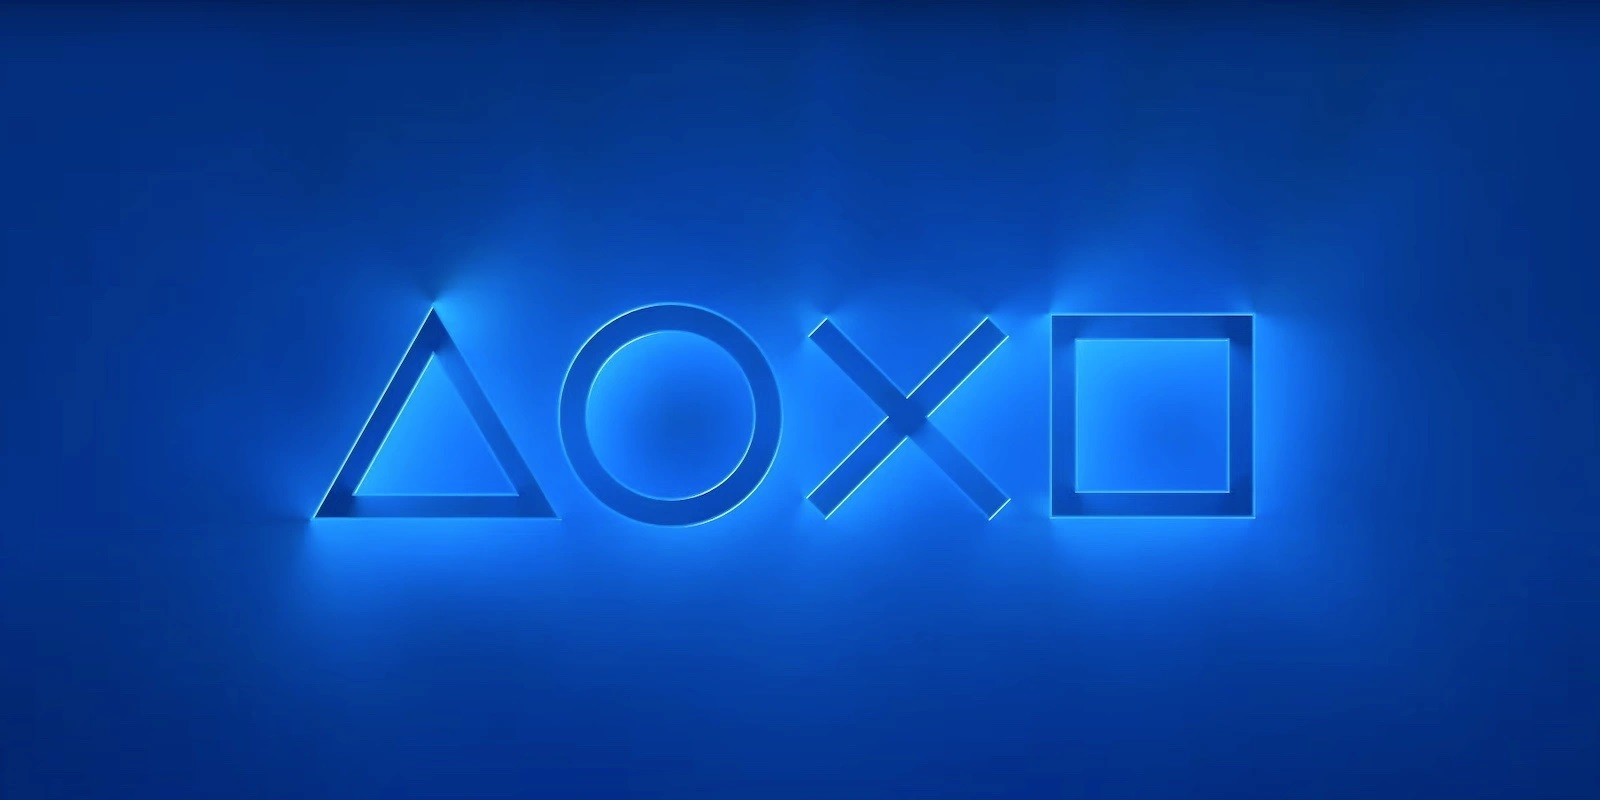 PS4 News, Rumors and Information - Bleeding Cool News Page 1